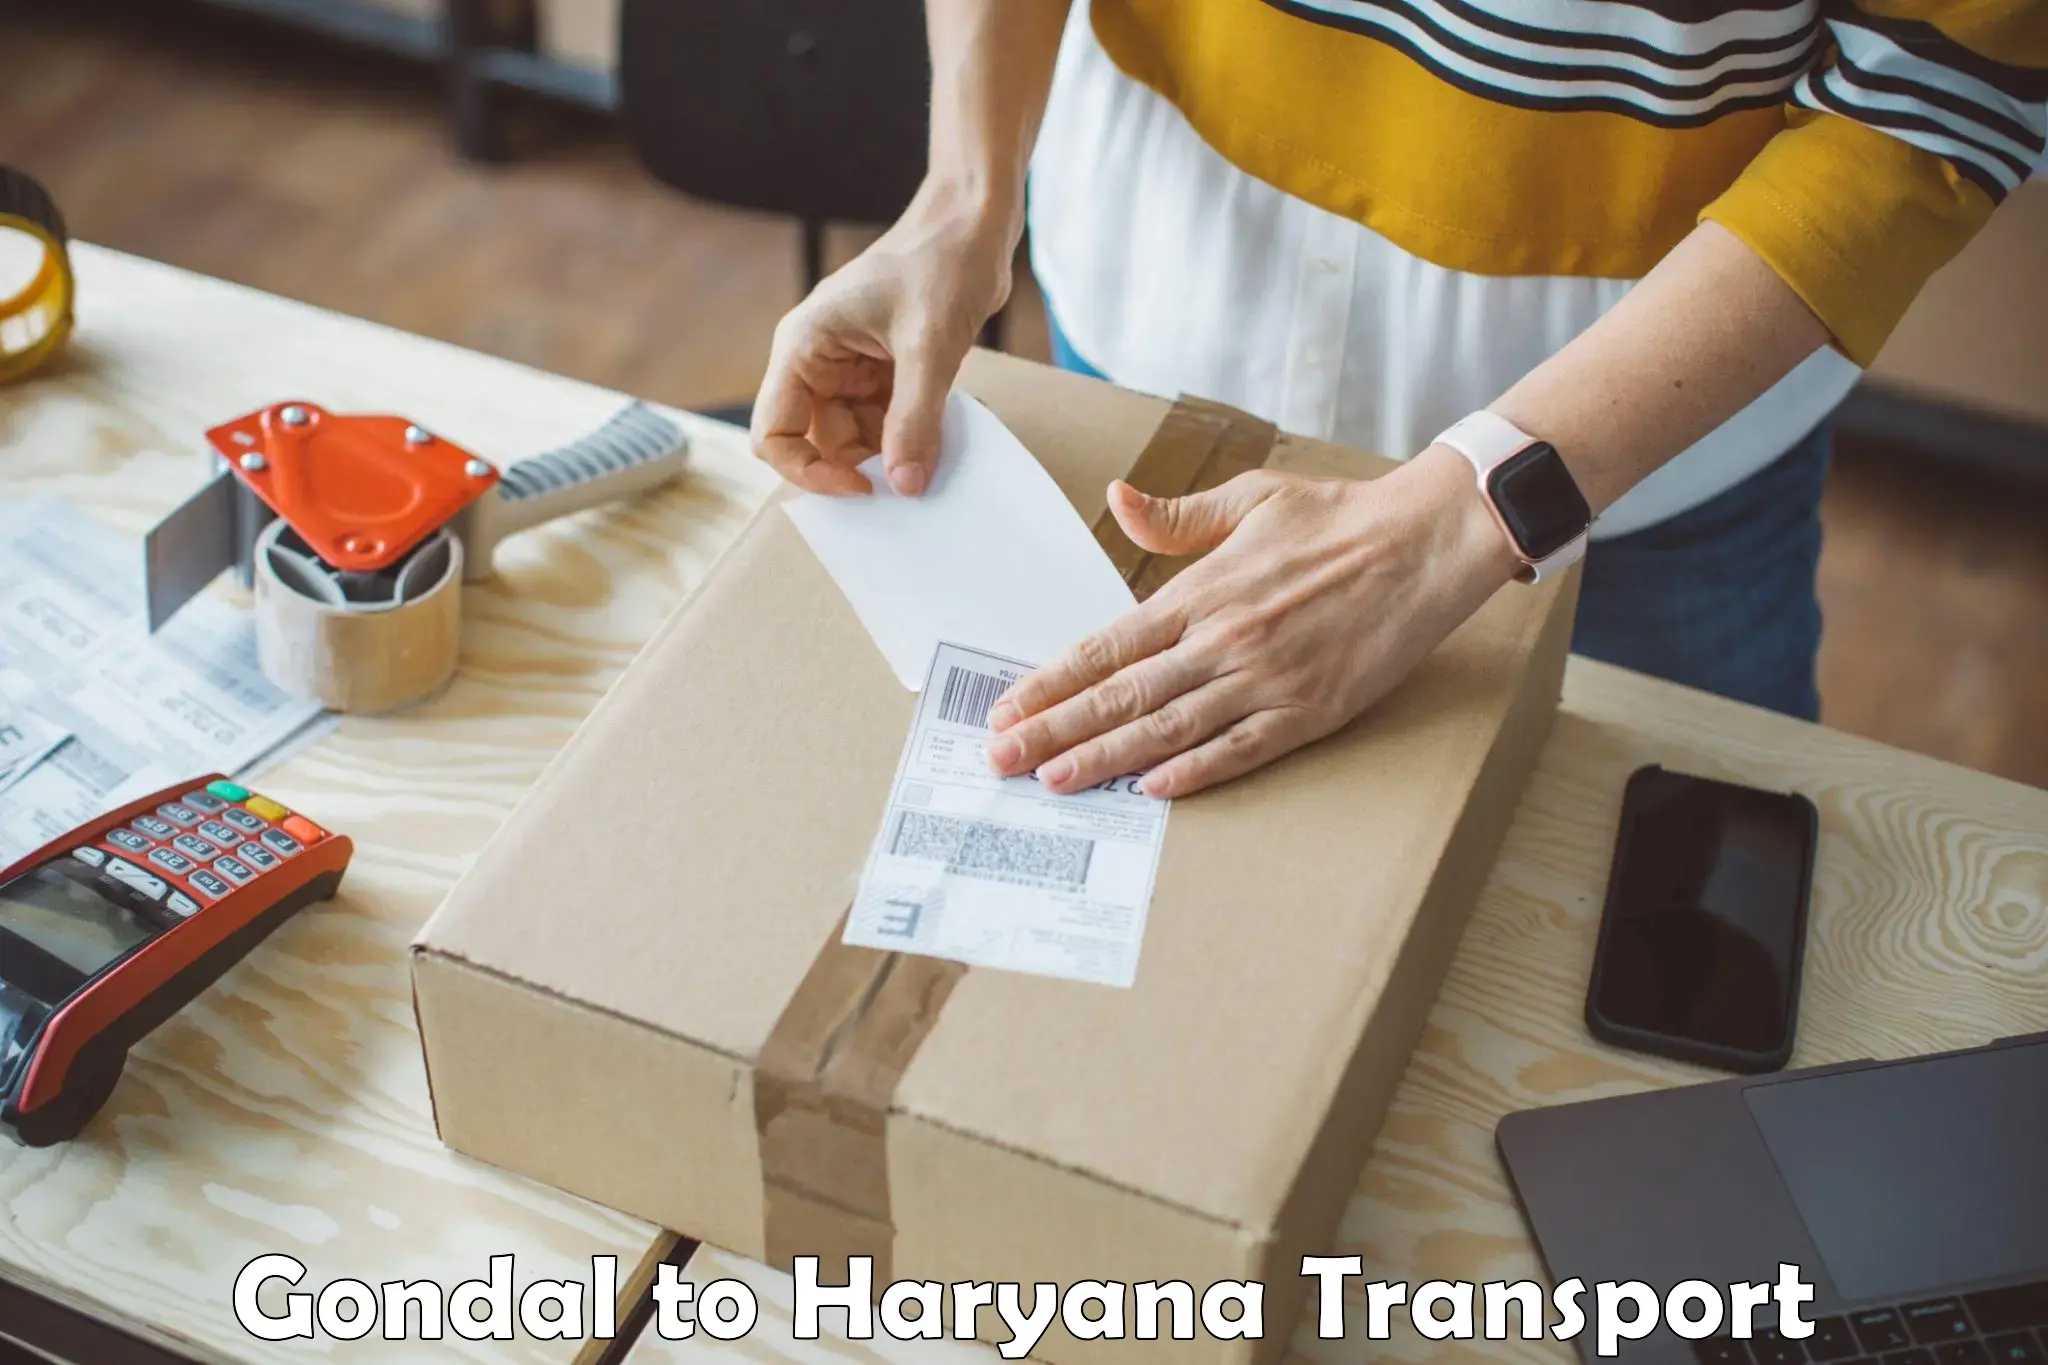 Commercial transport service Gondal to Faridabad